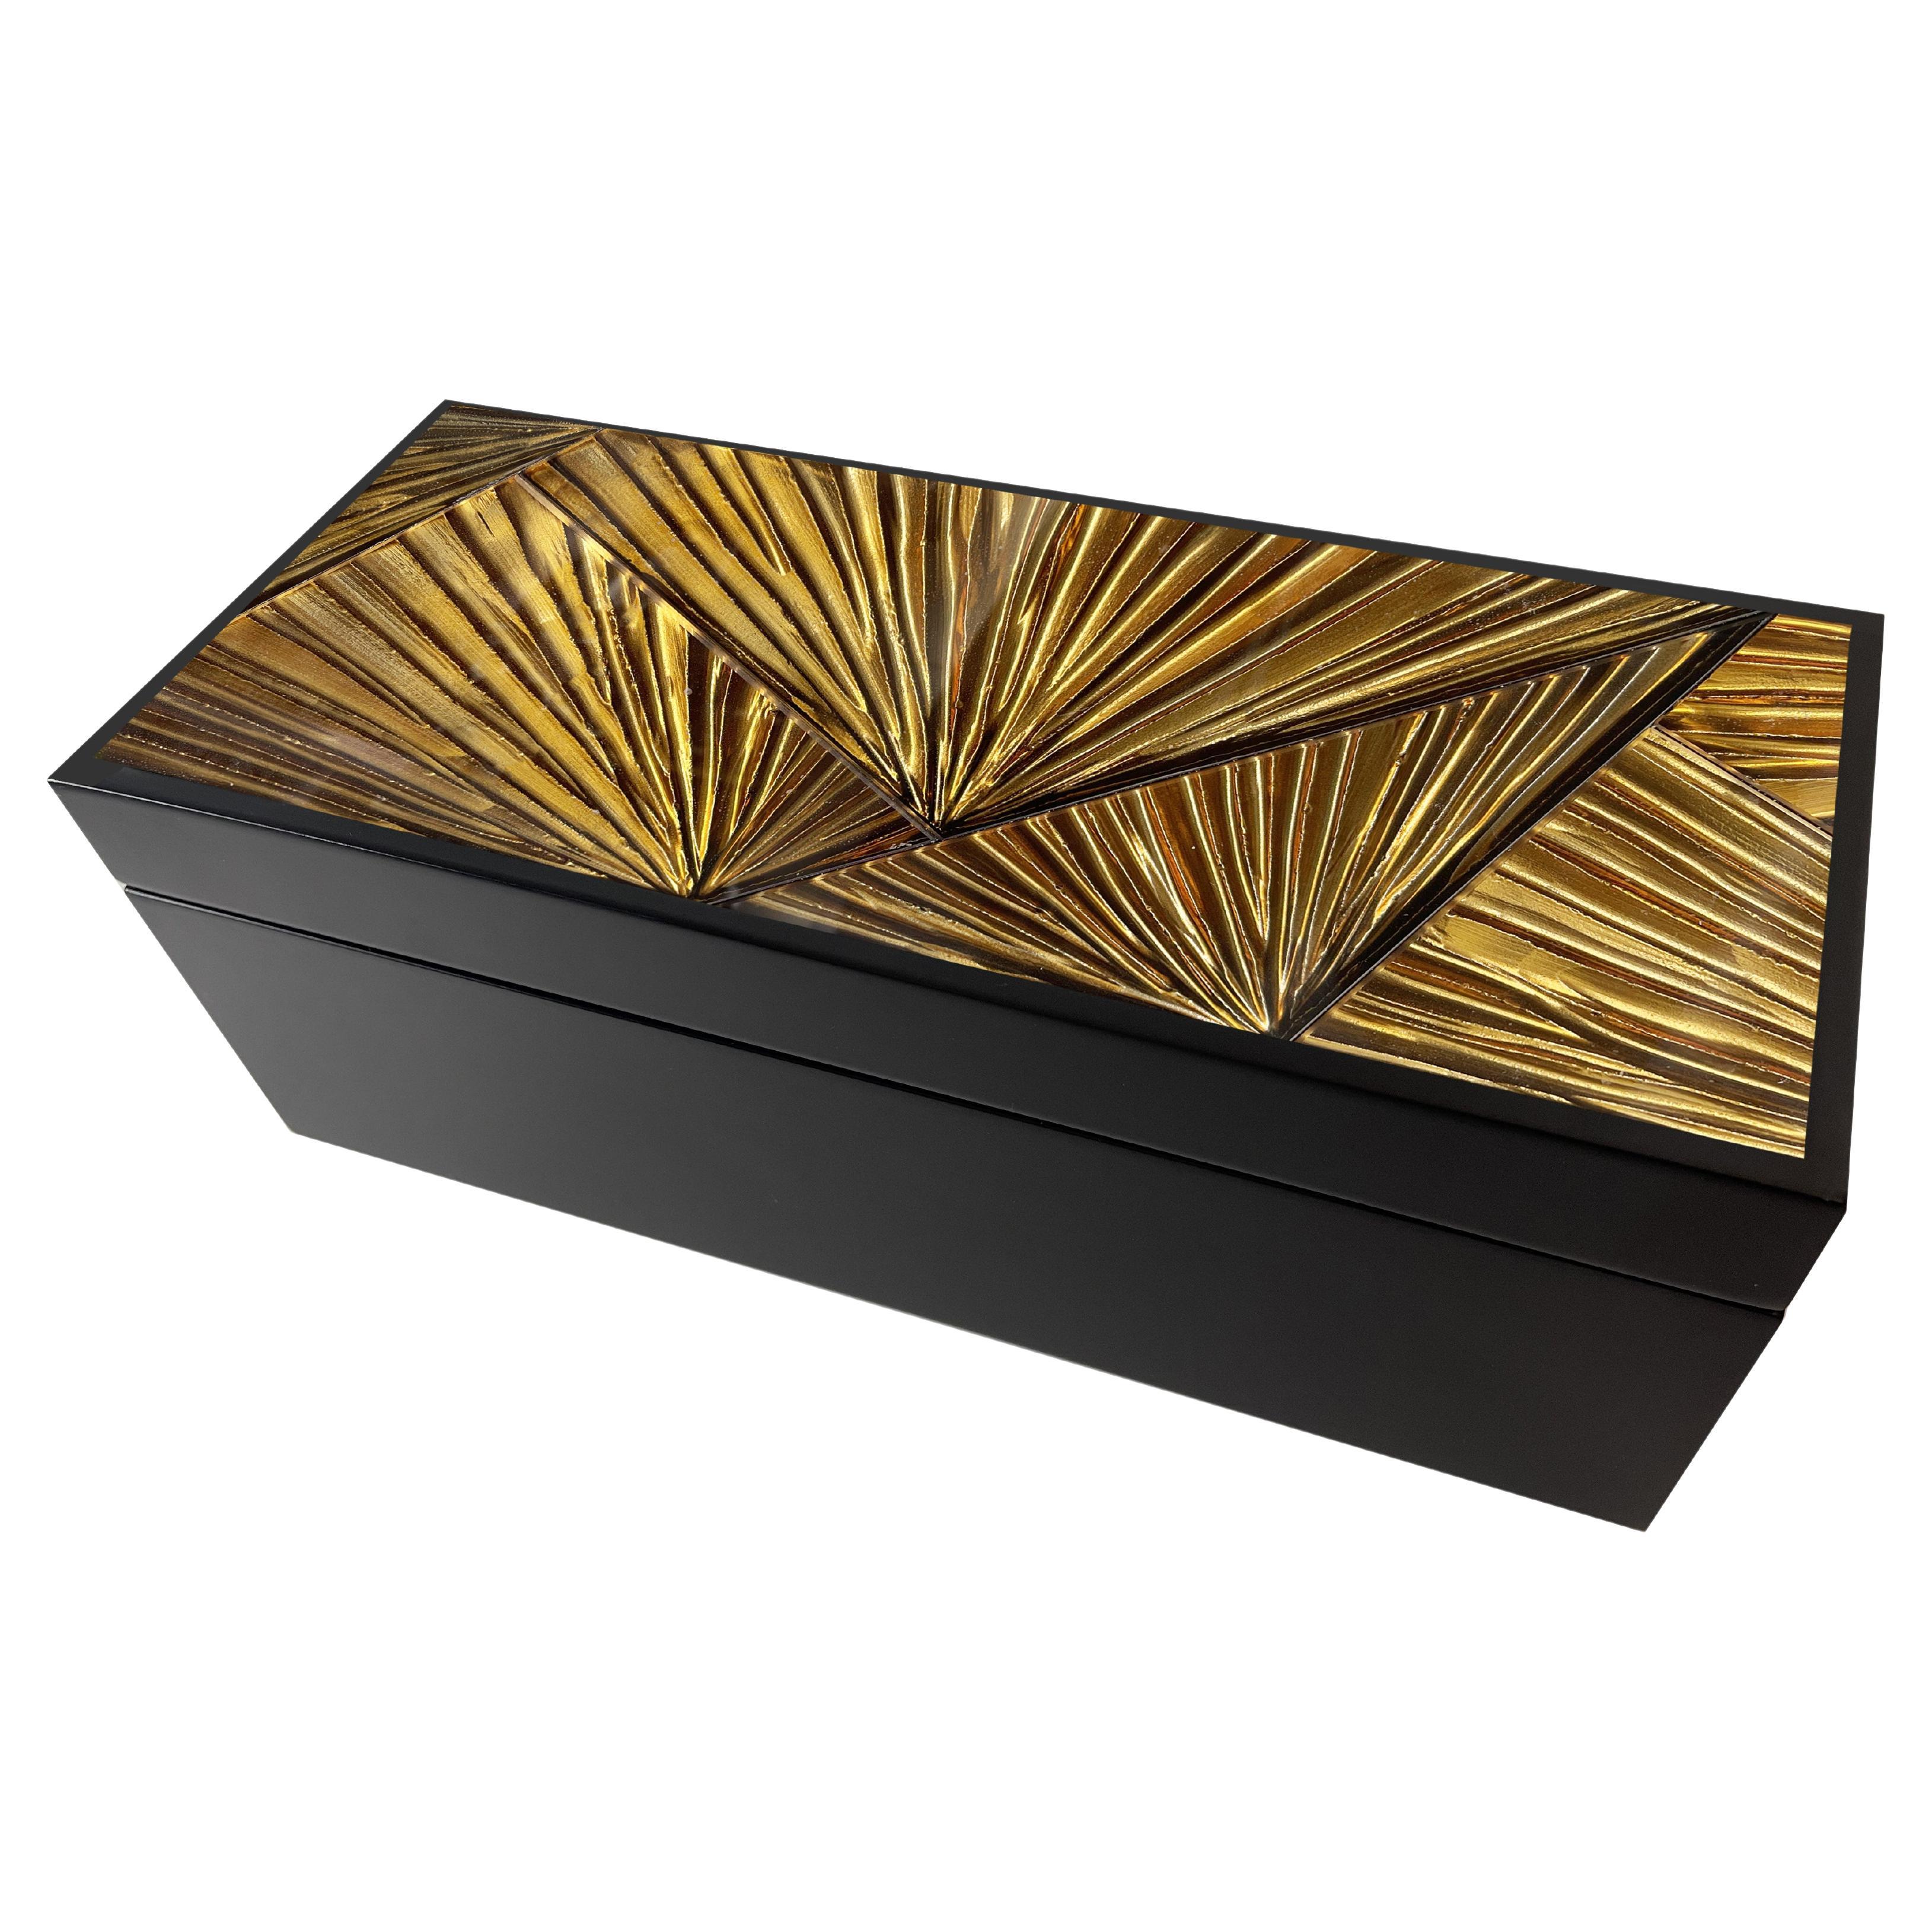 Contemporary Jewelry Box Handmade Black Wood and Engraved Glass by Ghirò Studio For Sale